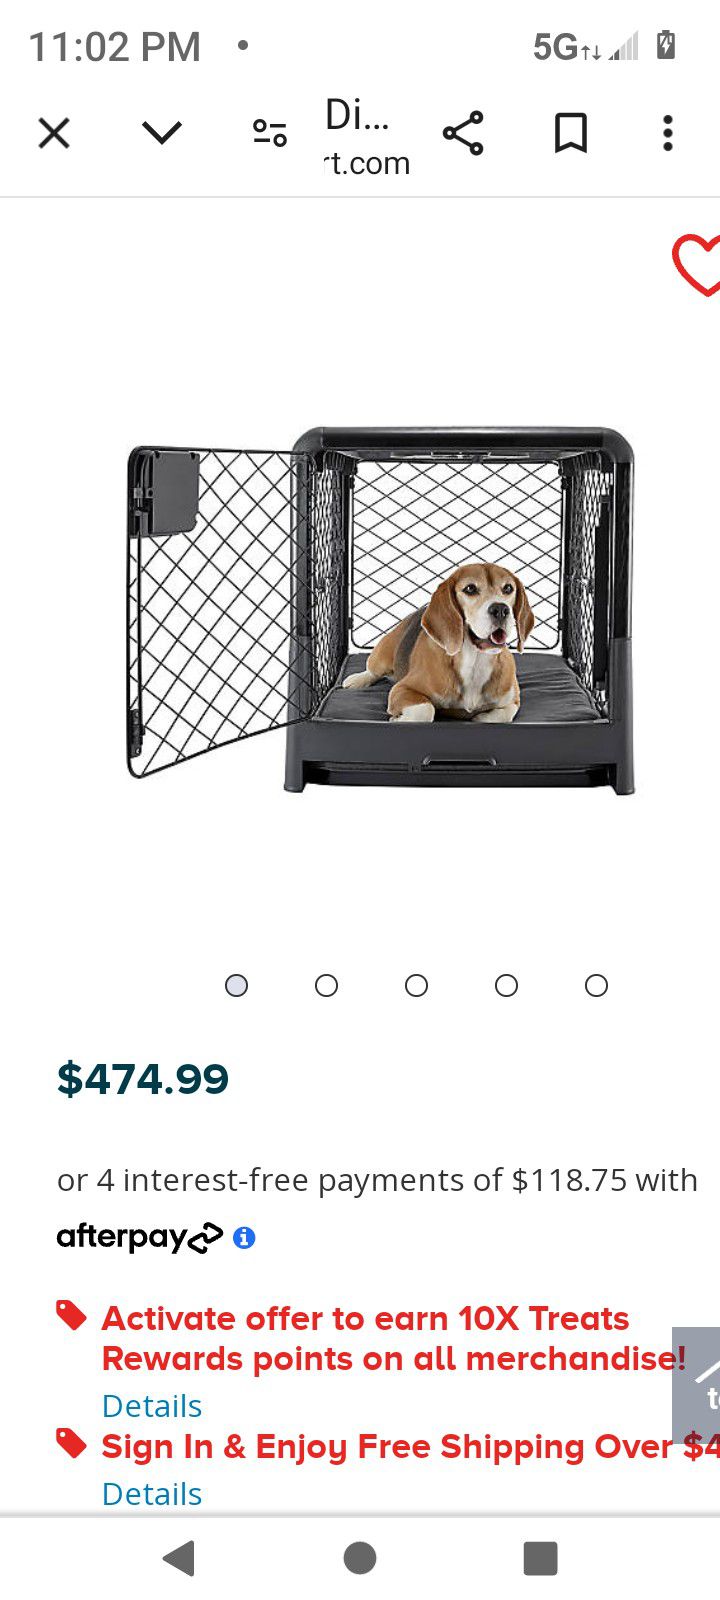 Portable Travel Dog Crate 